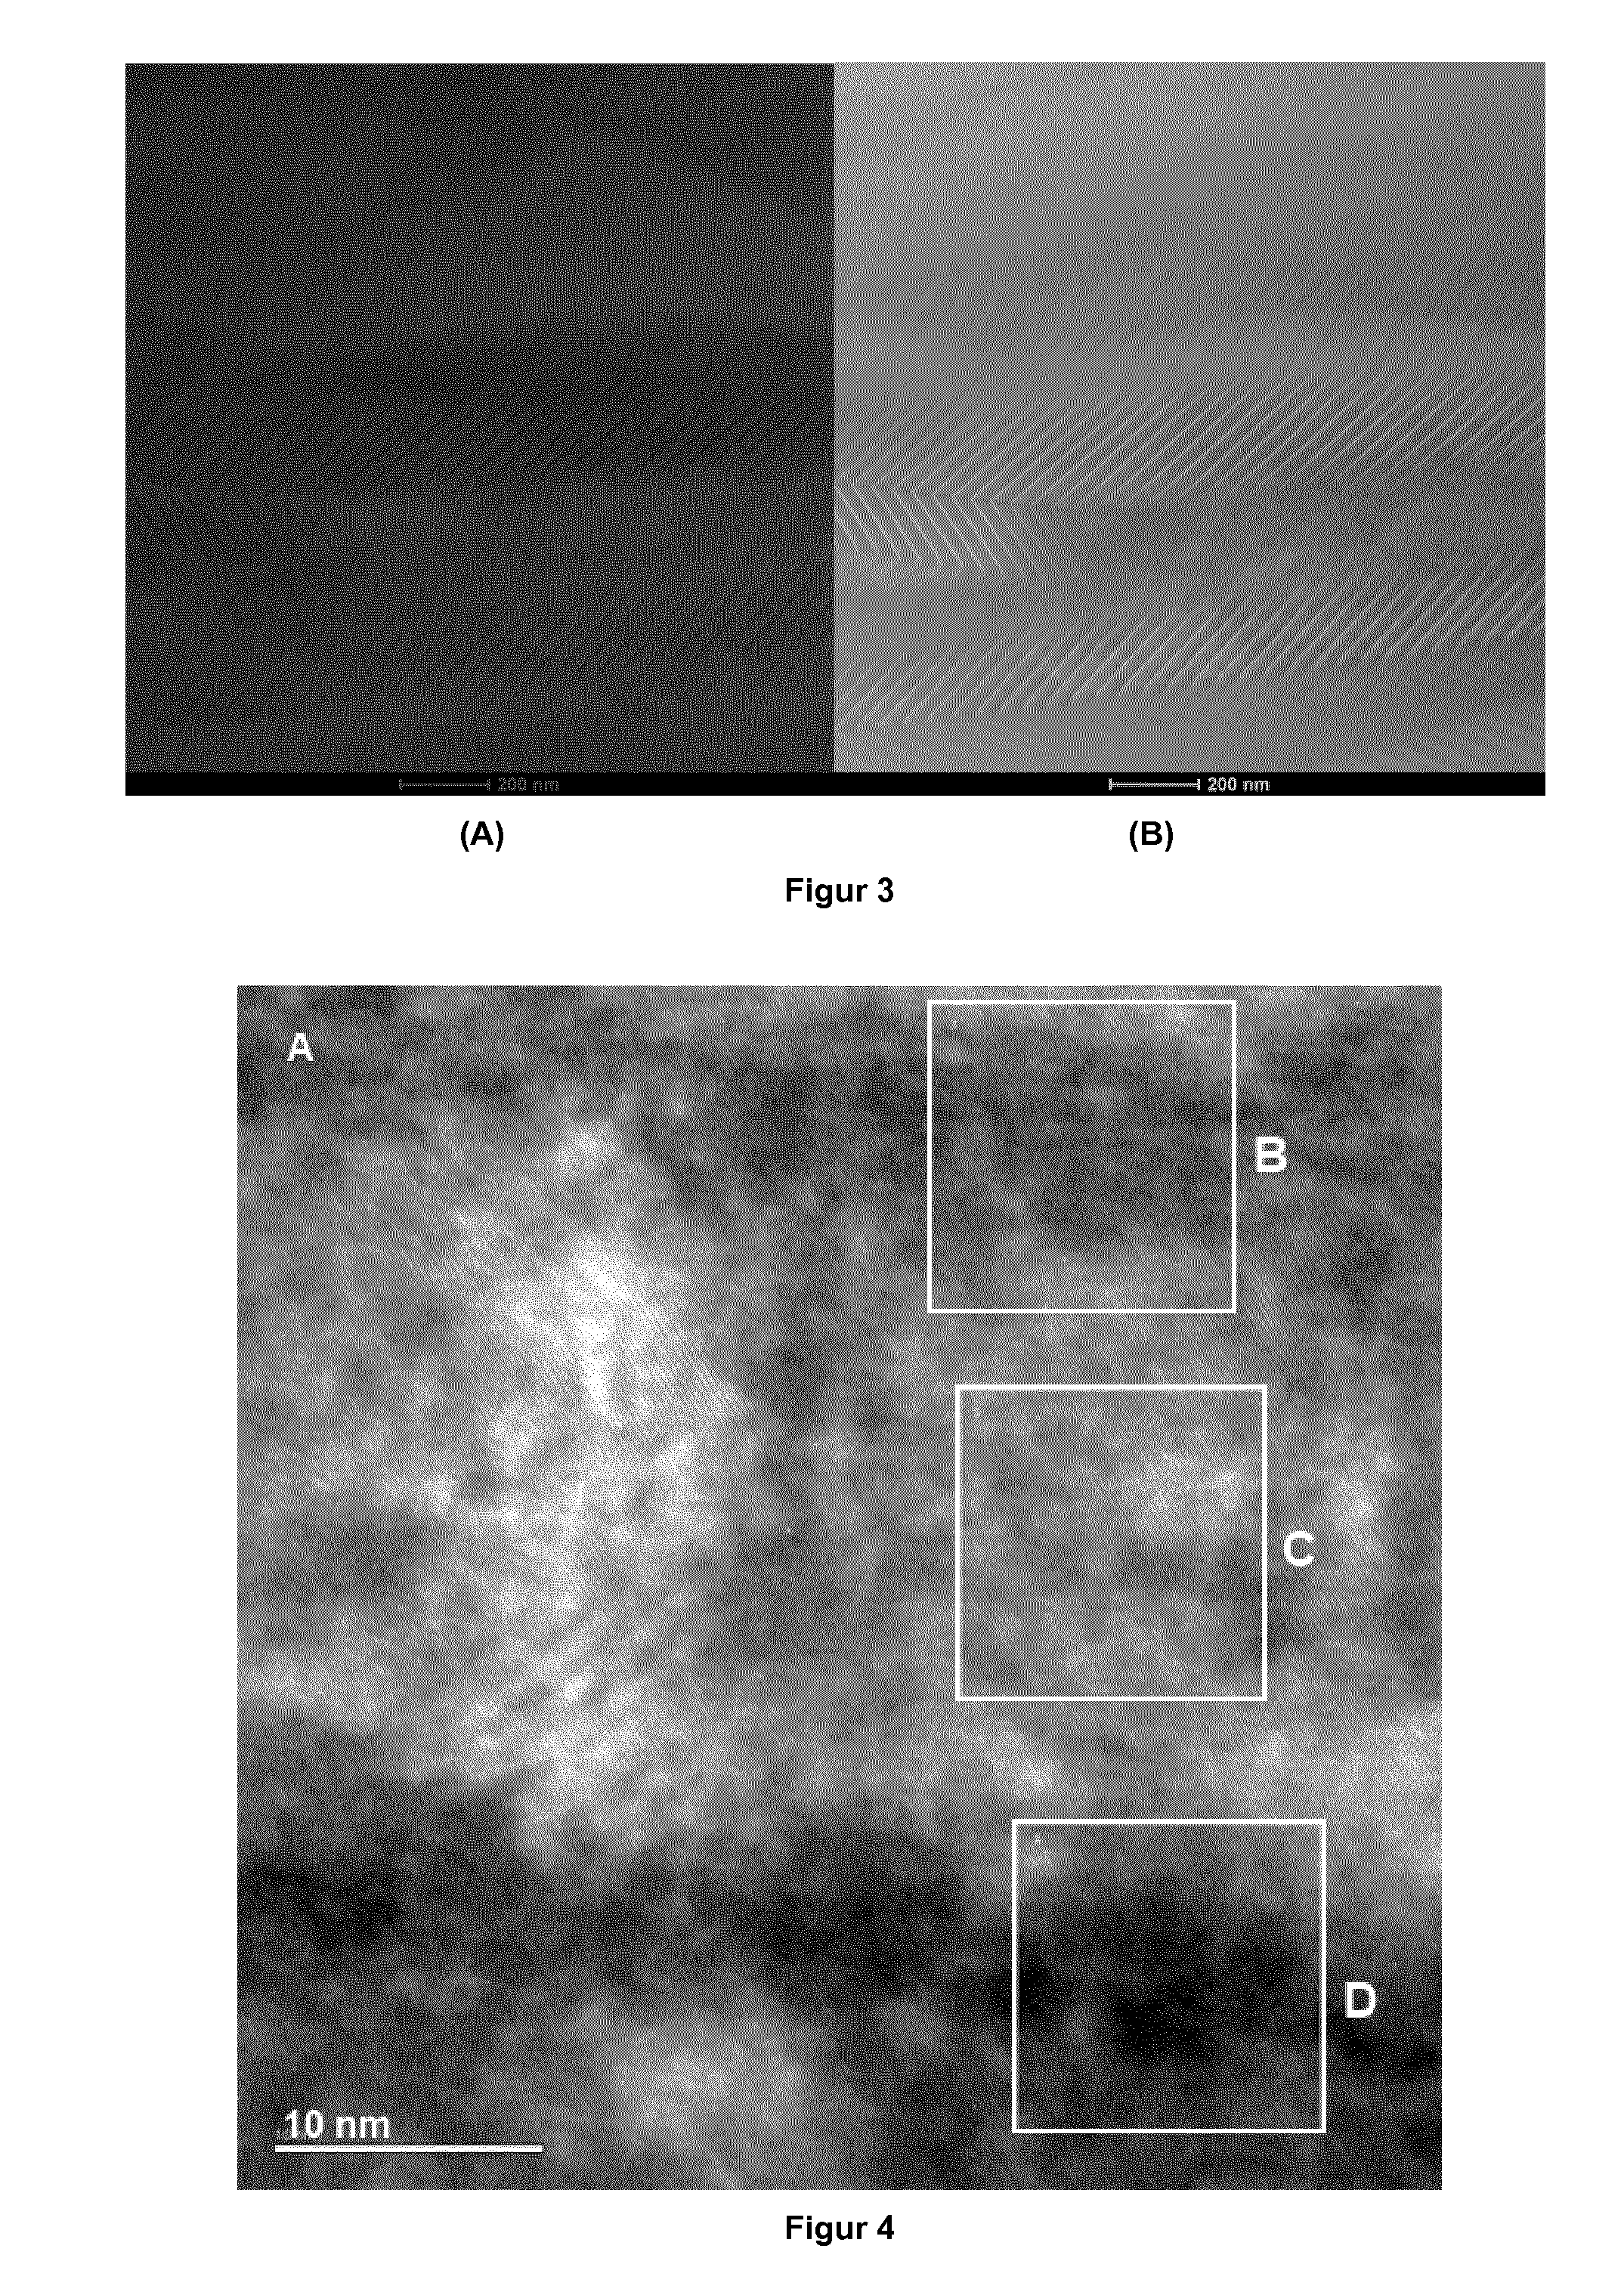 TiAlCN Layers With Lamellar Structure